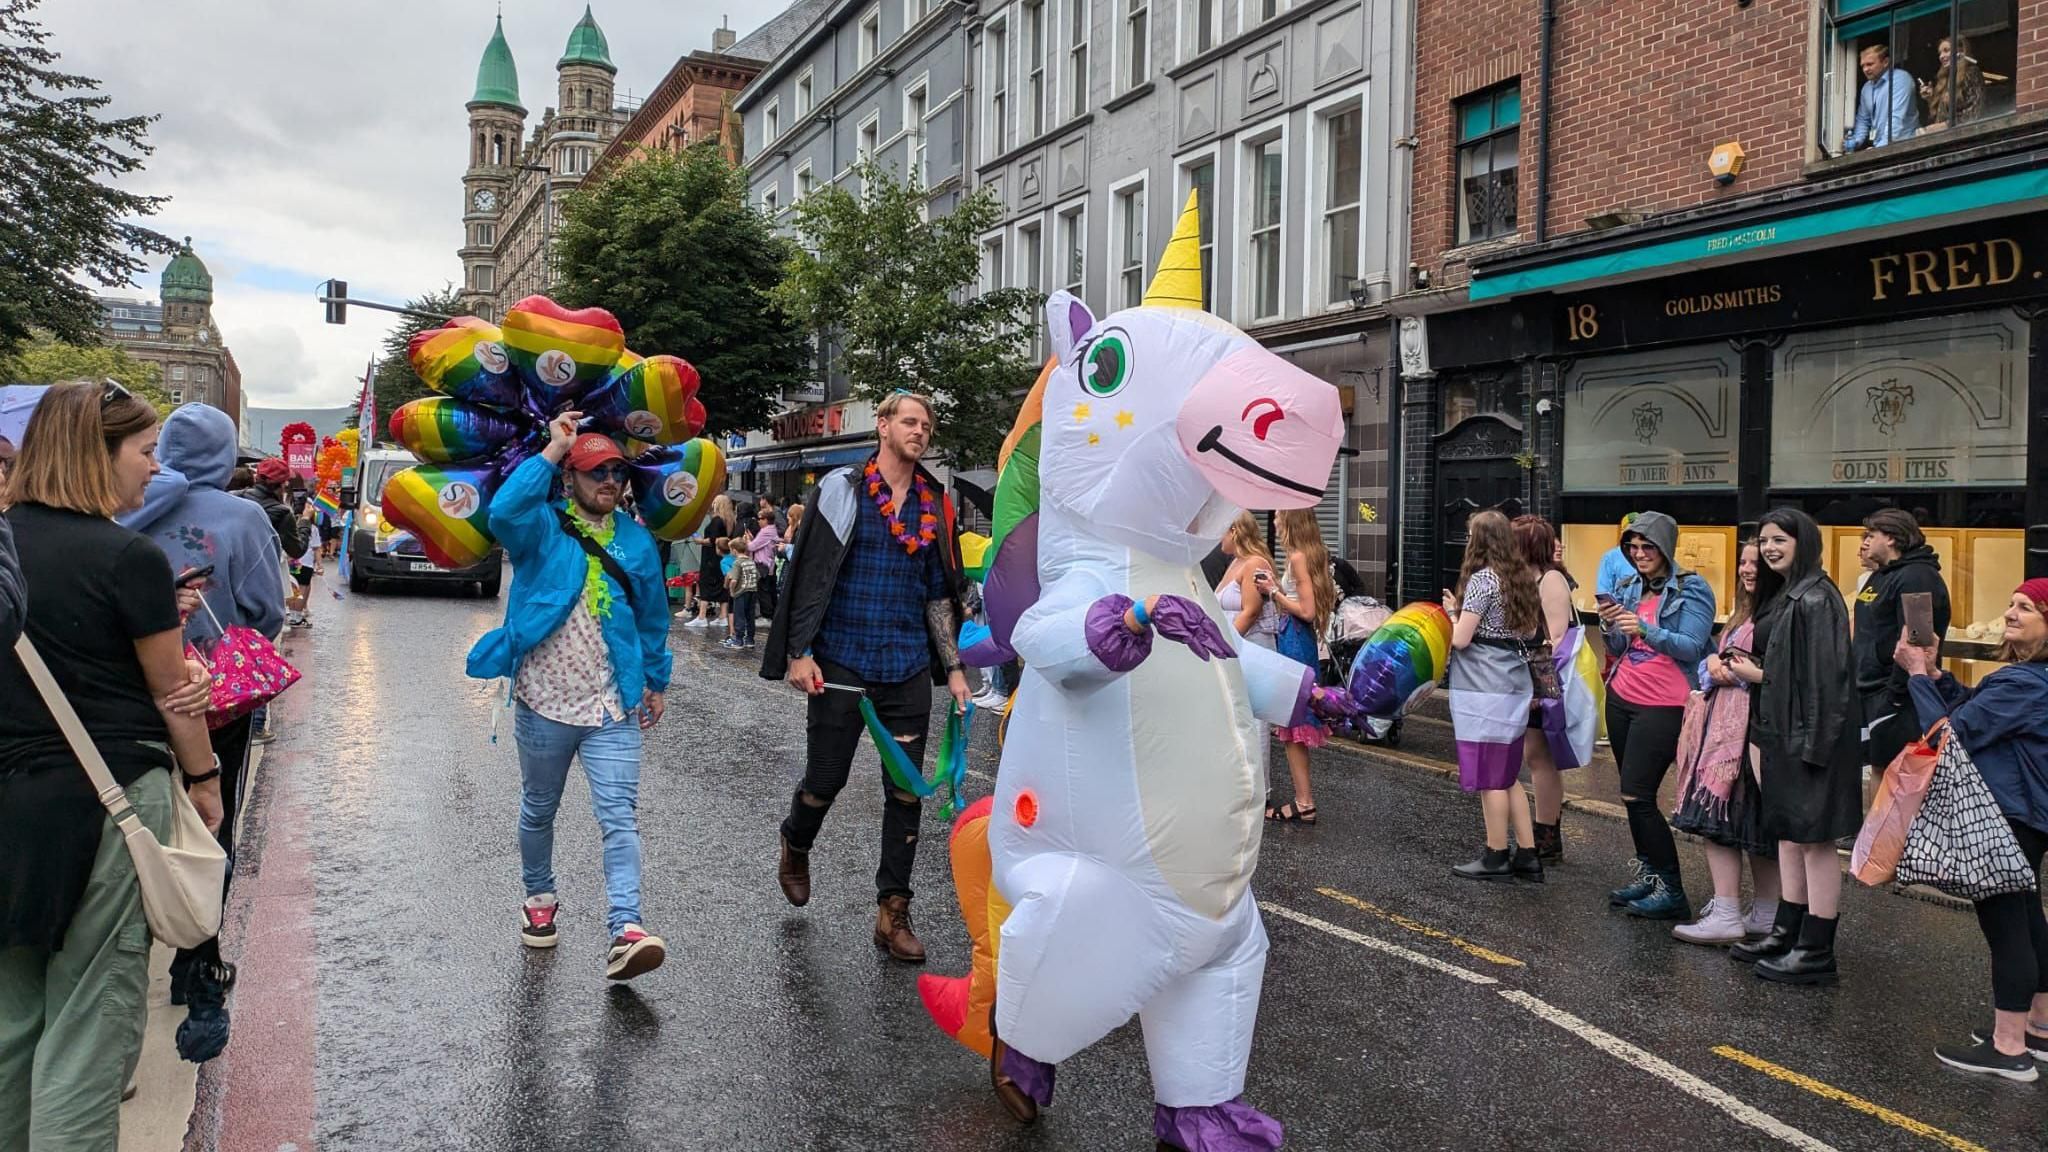 Person dressed in an inflatable unicorn costume walking in the parade